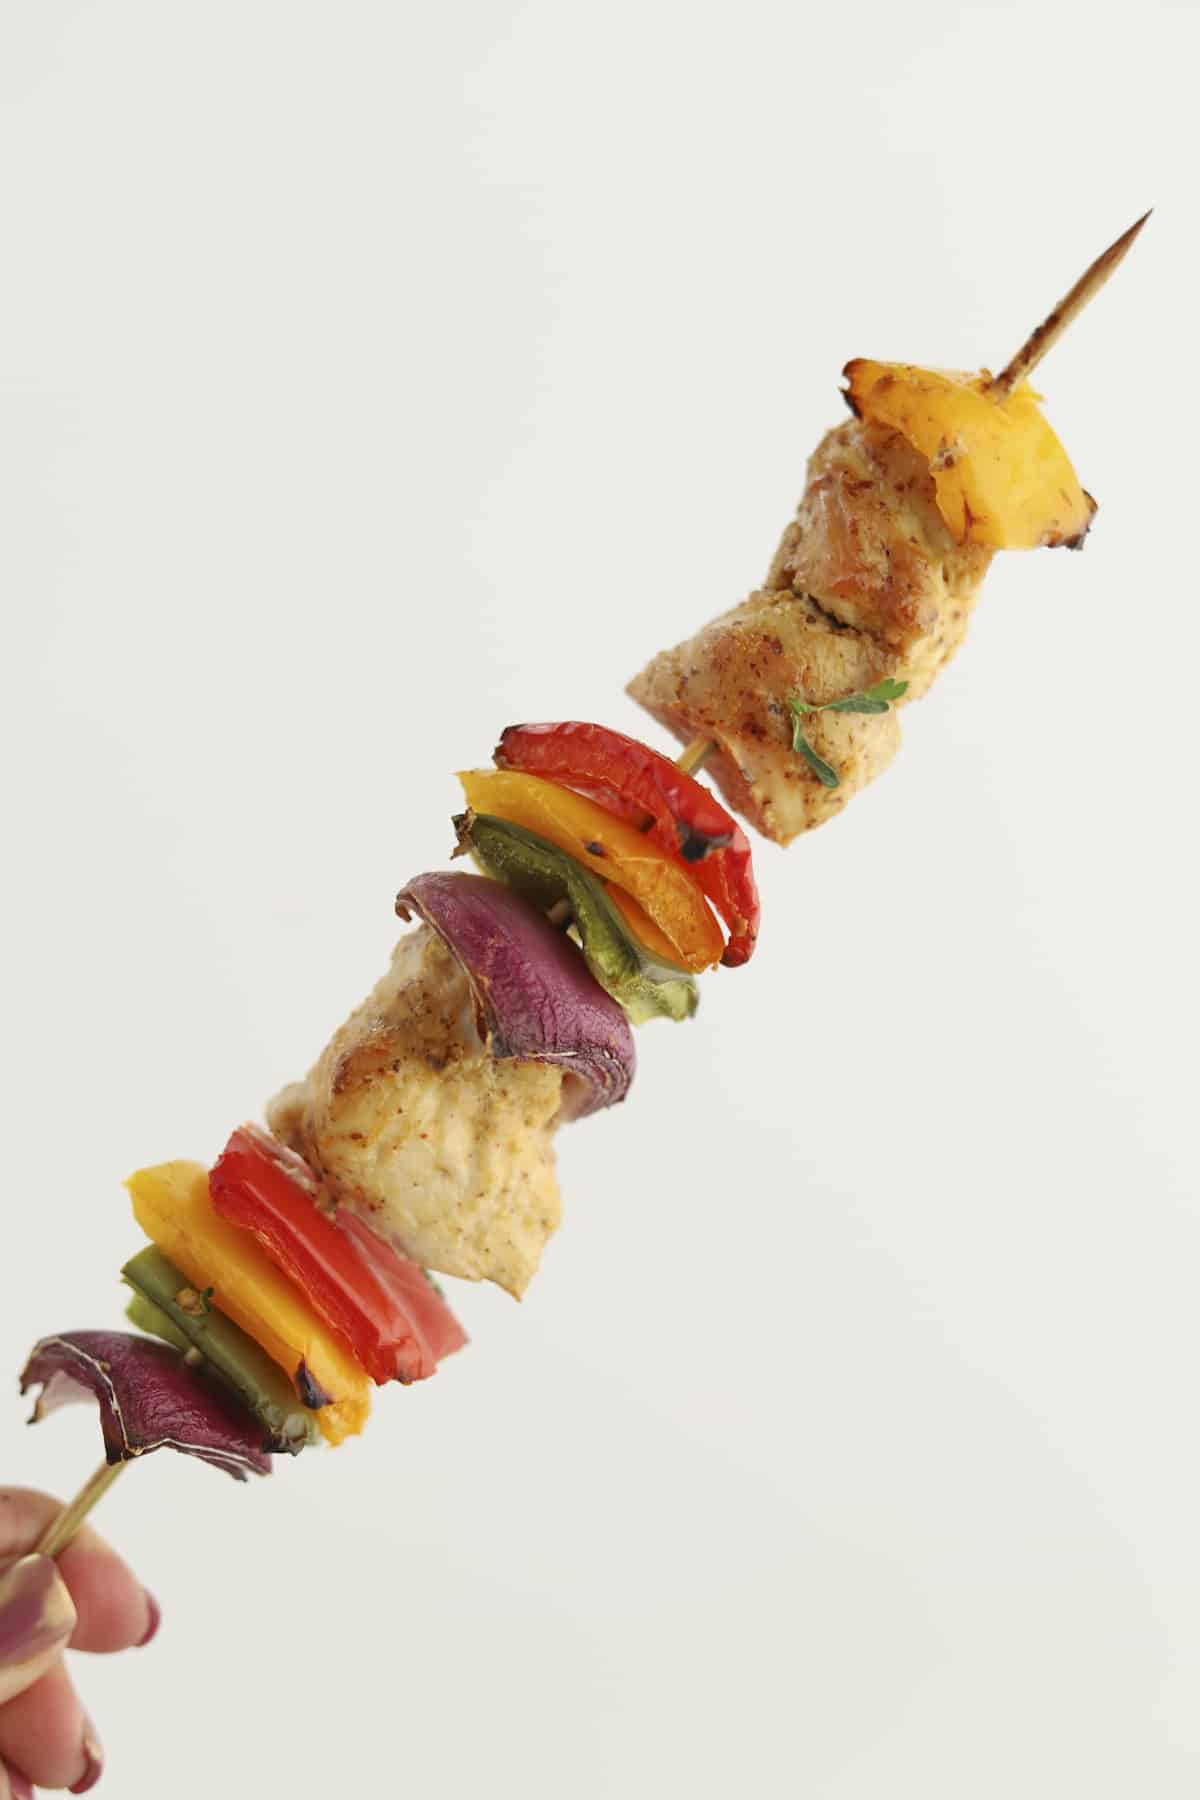 Oven-Baked Chipotle Chicken Skewers - Food Dolls